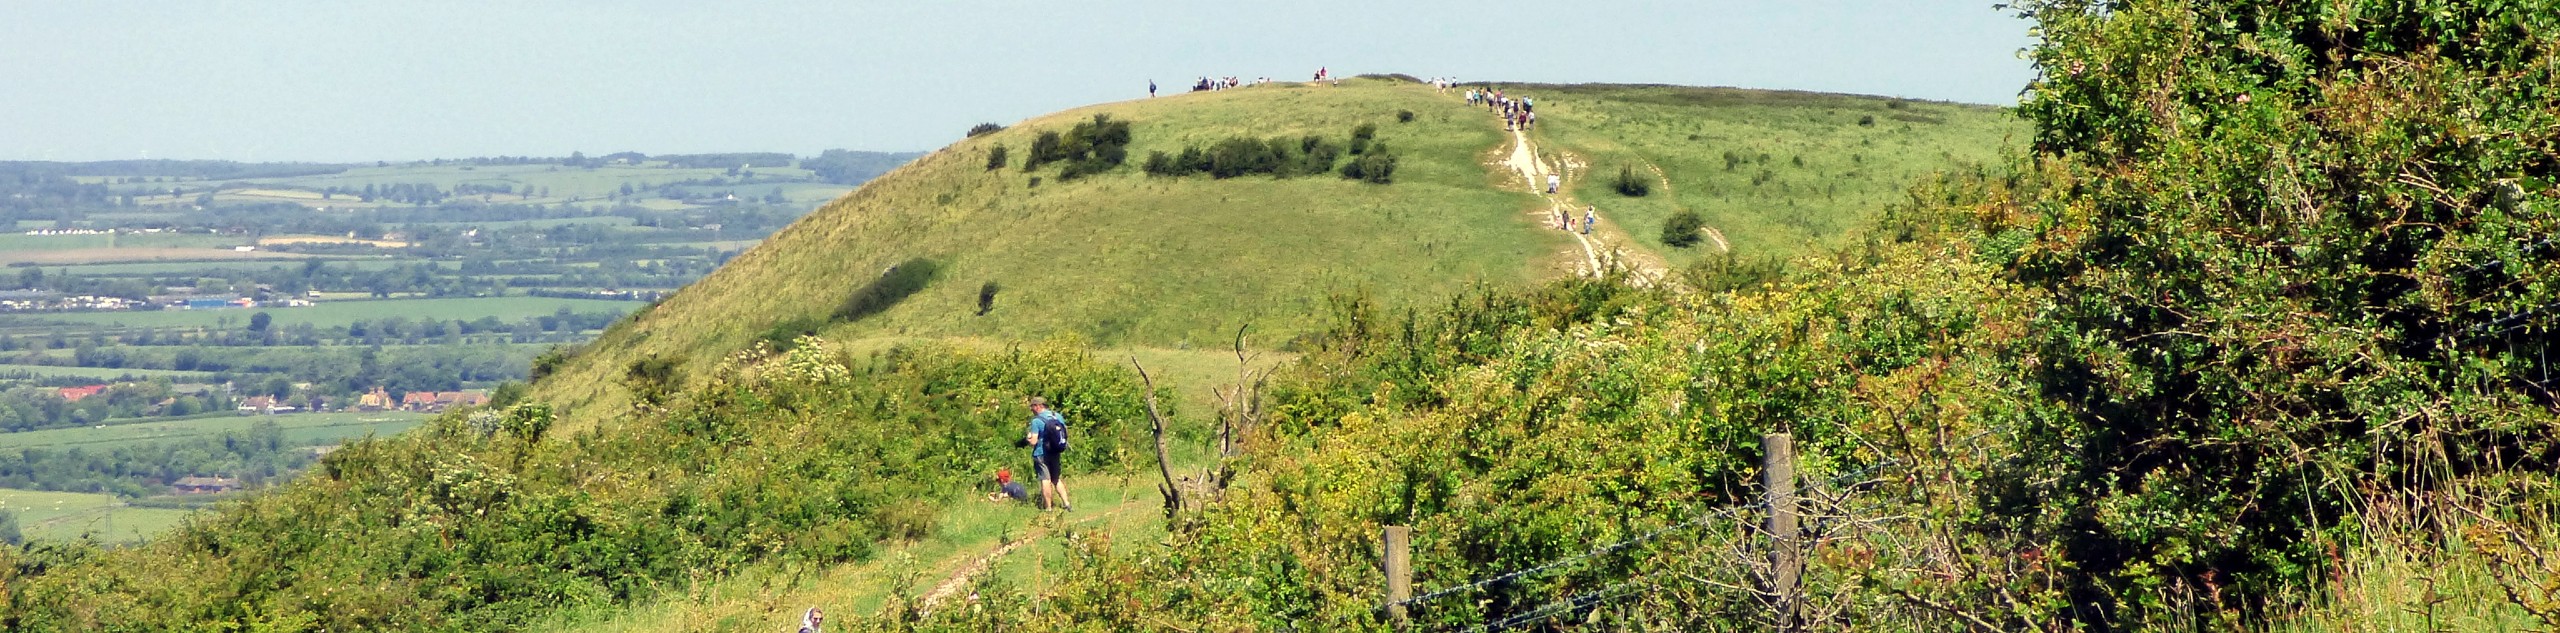 Ivinghoe Beacon Extended